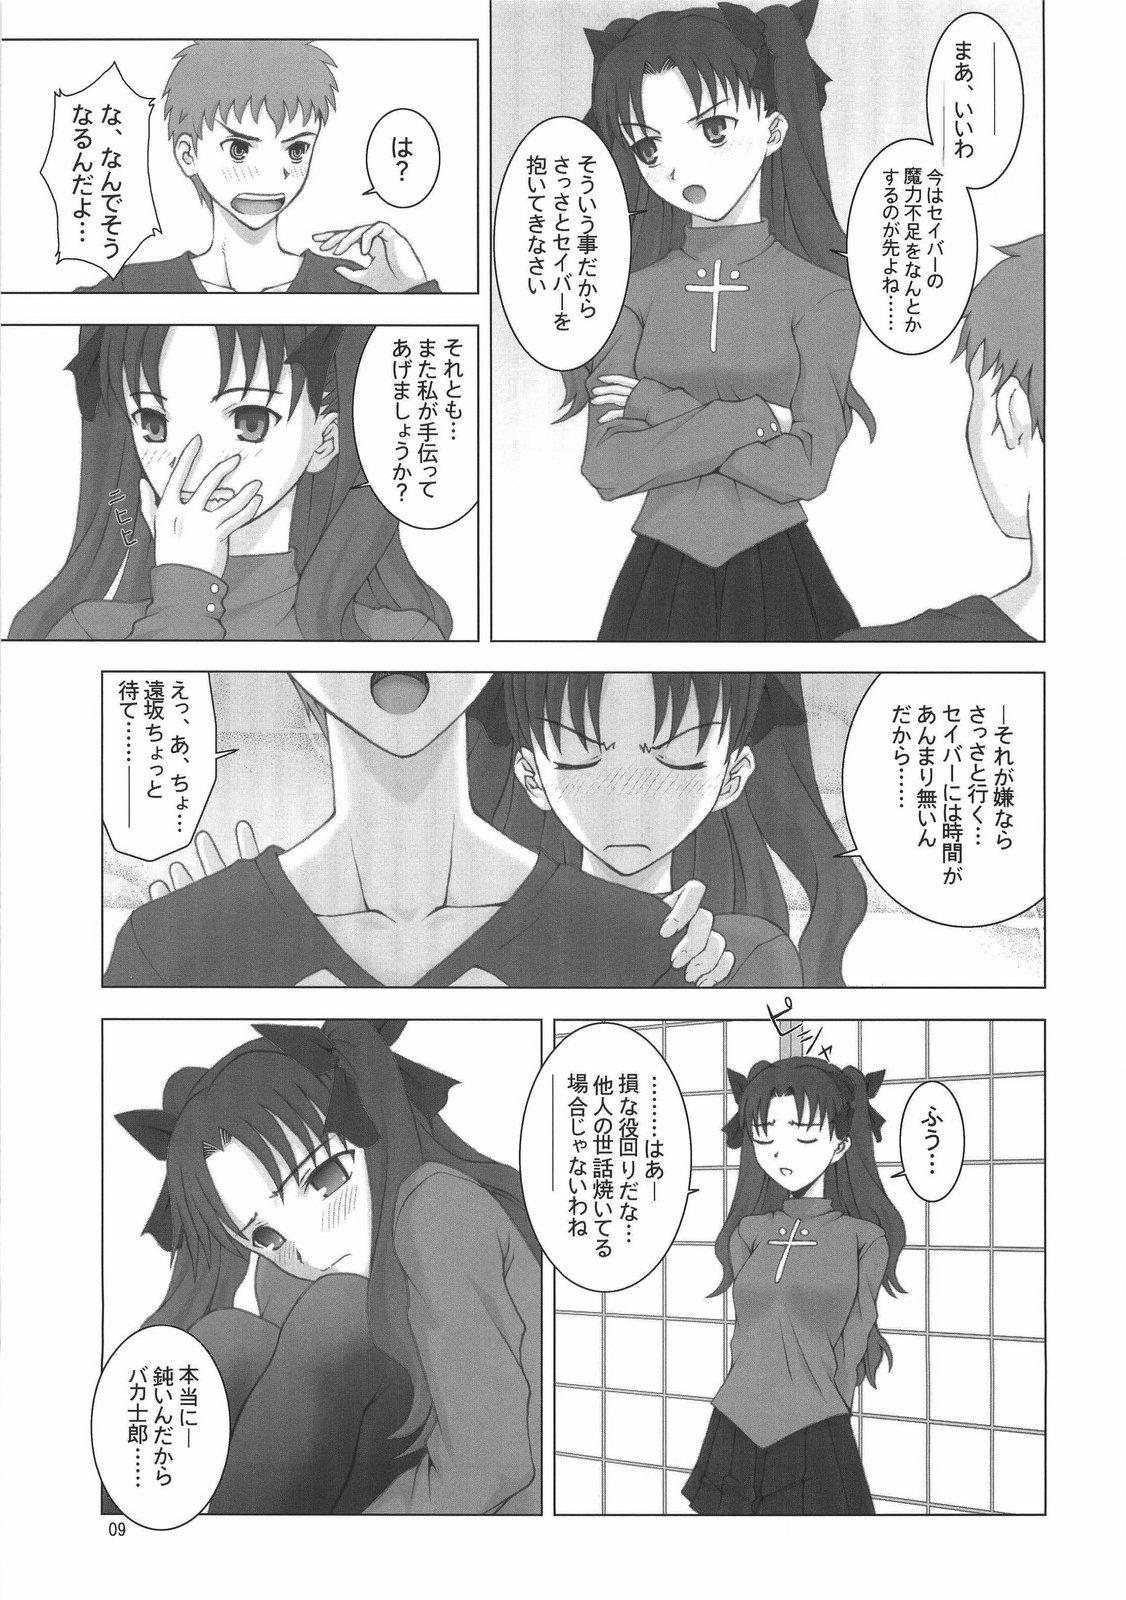 Masterbate R25 Vol.9 Unlimited/fotune - Fate stay night Pick Up - Page 8